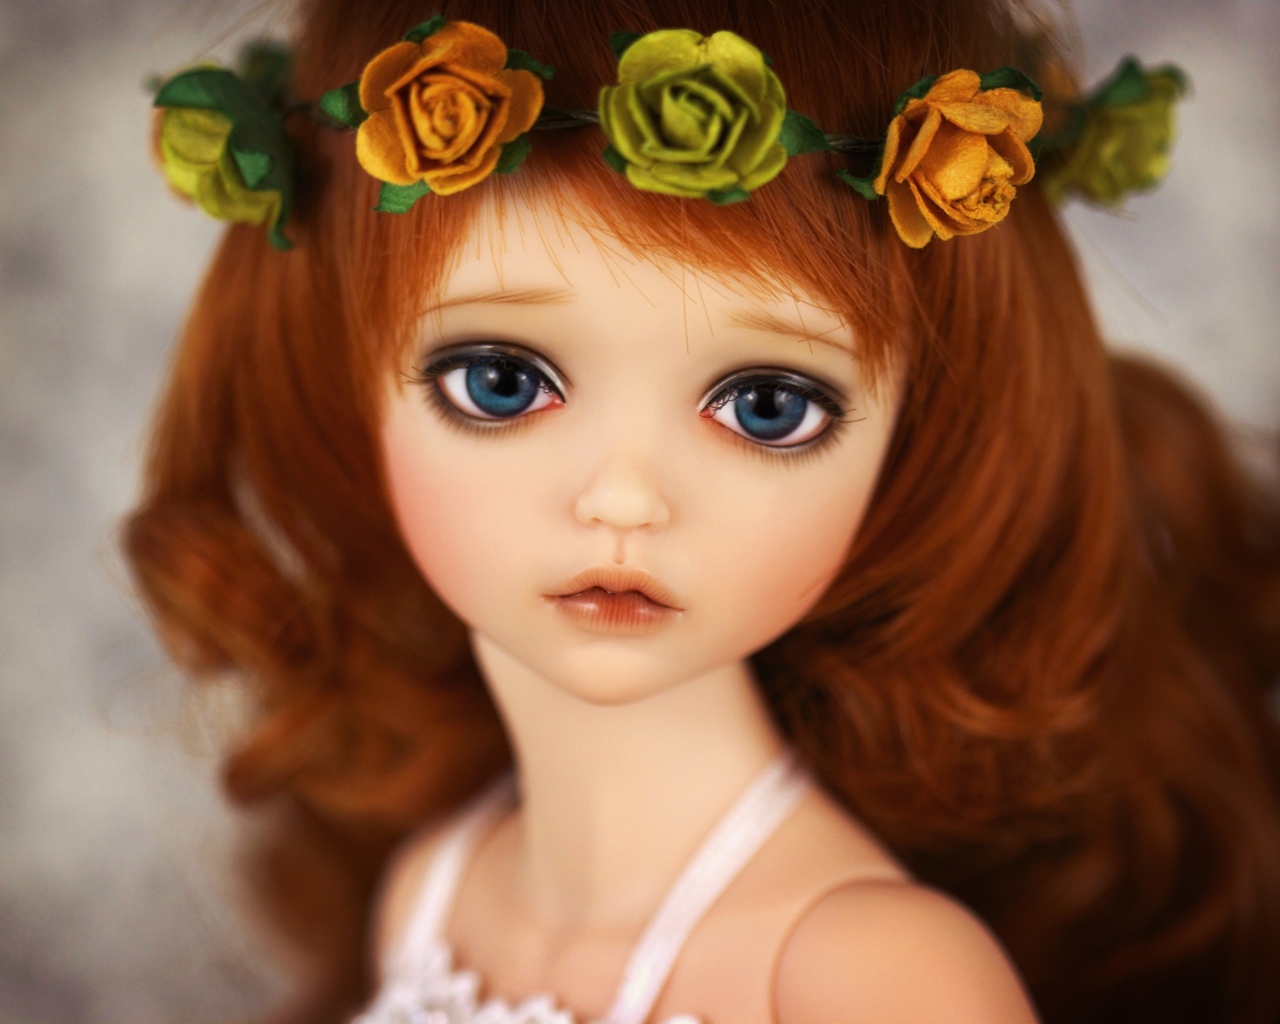 Redhead Doll With Flower Crown wallpaper 1280x1024